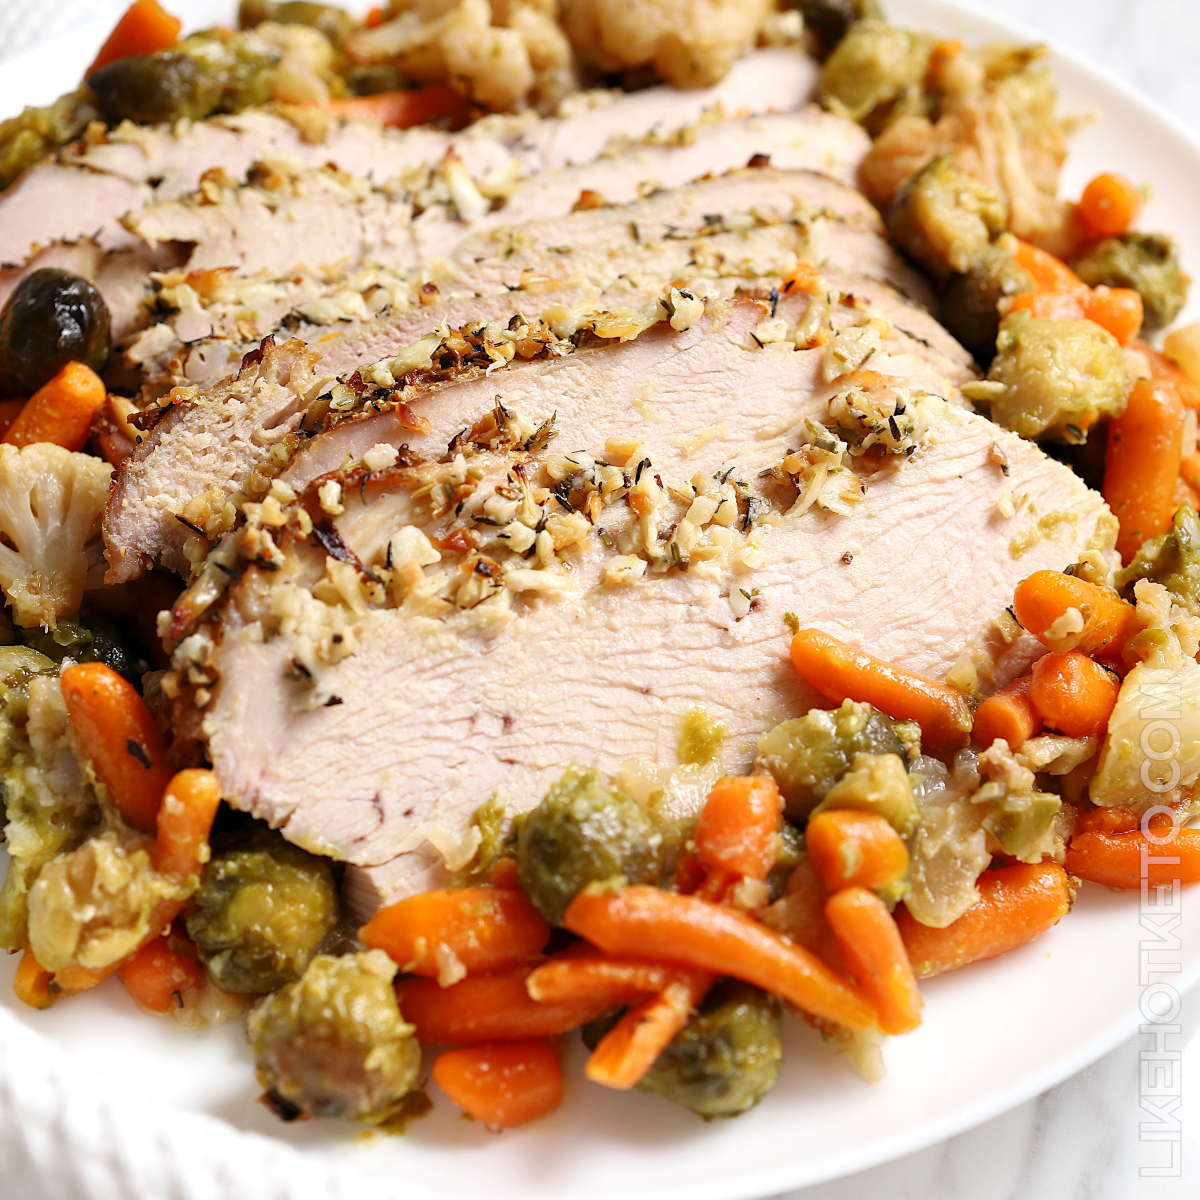 Sliced skinless turkey breast with garlic and herbs, in a bed of fall vegetables.